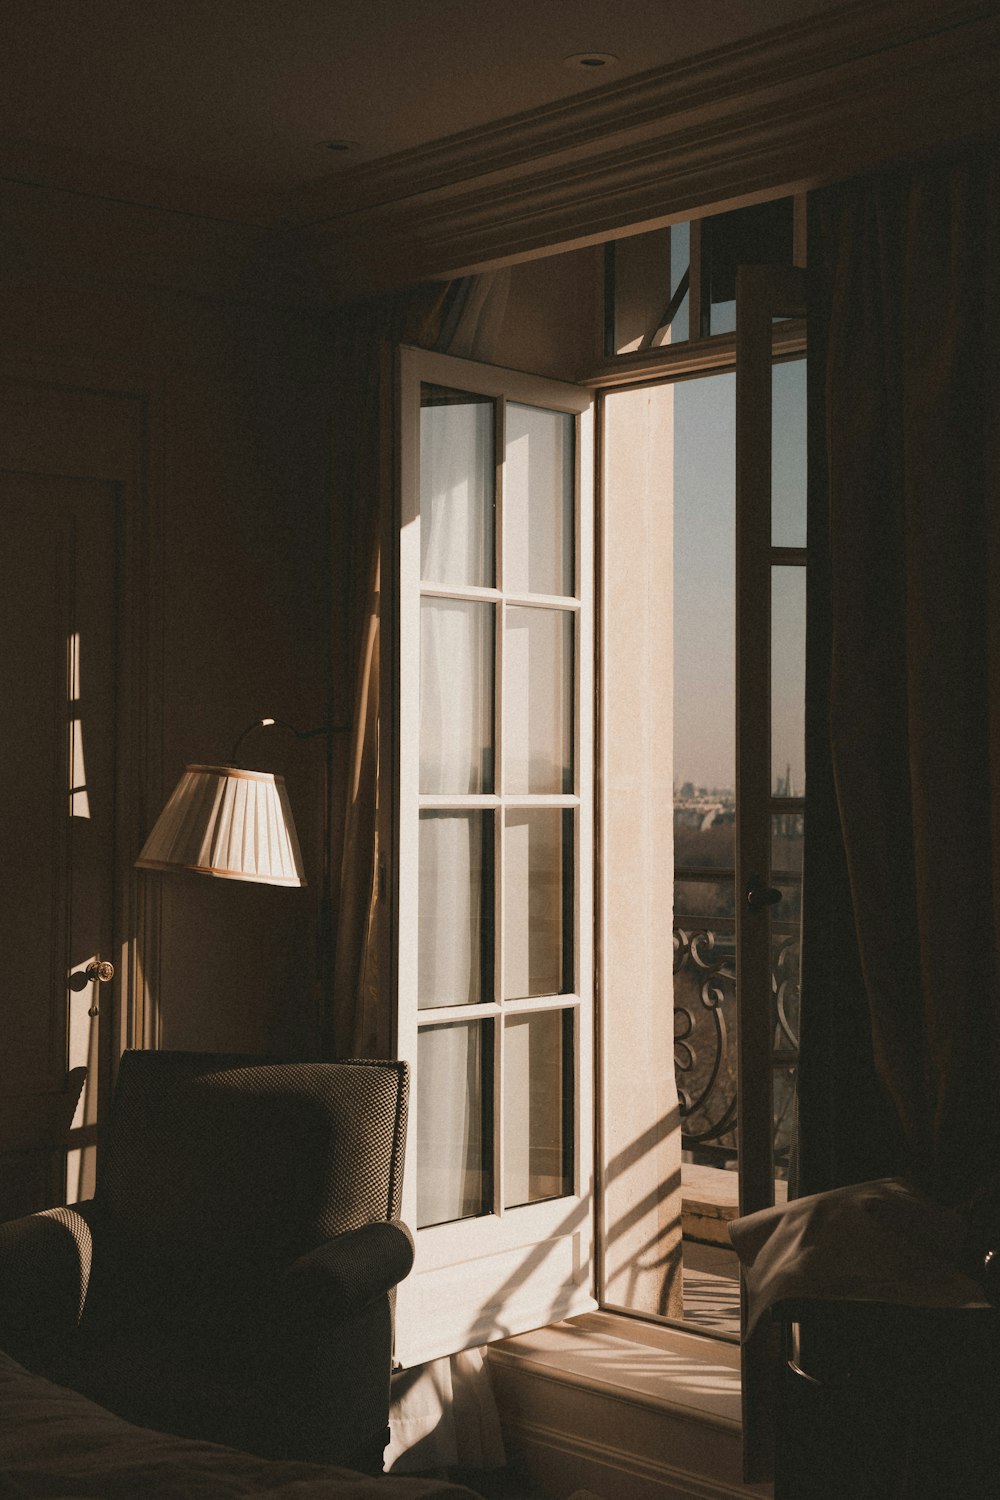 a chair sitting in front of a window next to a lamp